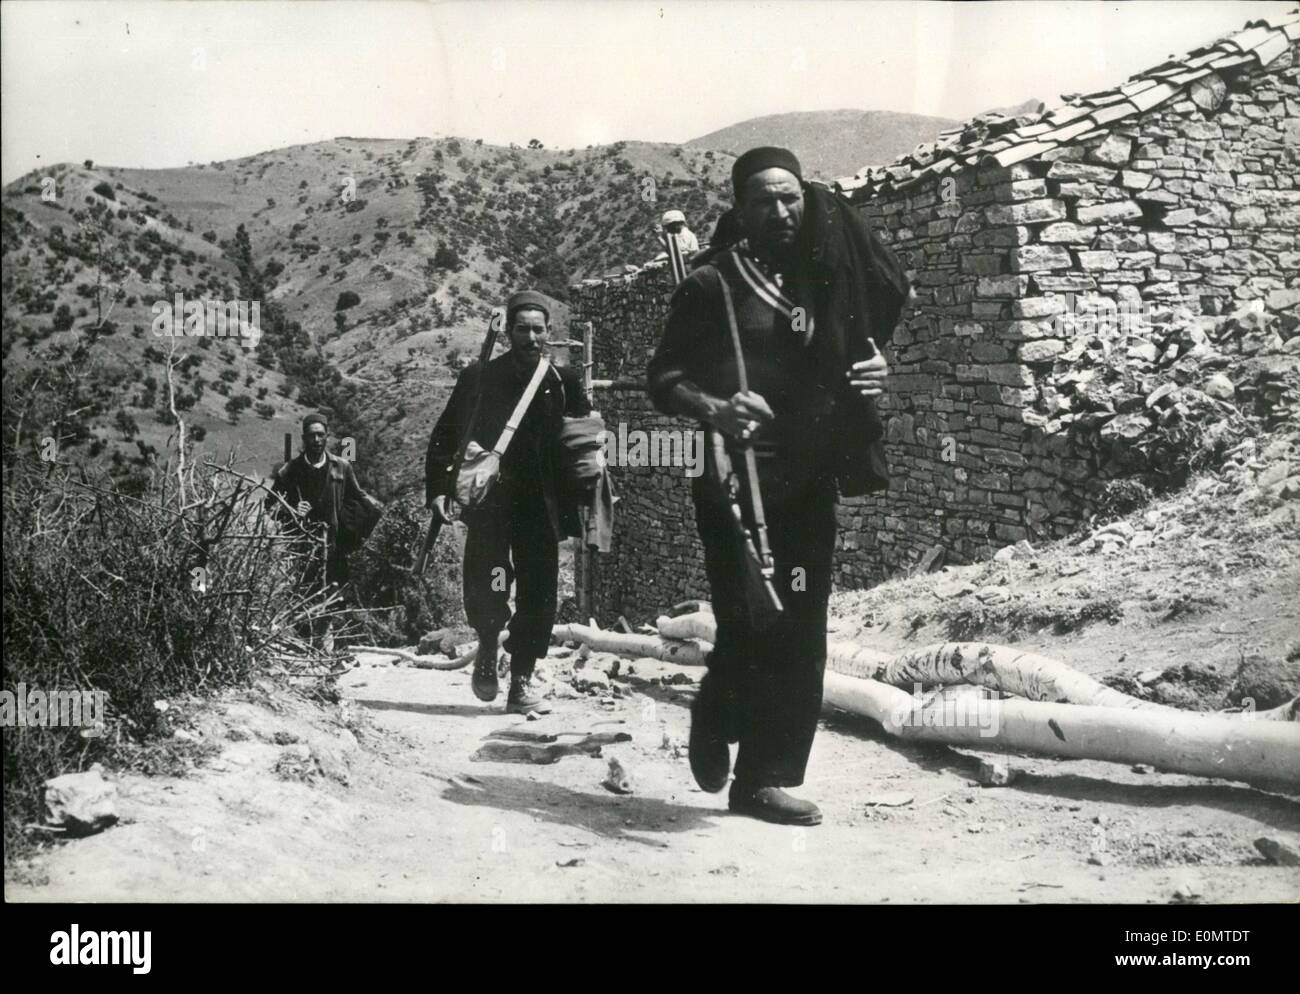 Jun. 06, 1956 - Natives Co-Operate in war against rebels: Loyal Algerian natives are helping French troops in their warfare against rebels in the Souman Area. Photo shows natives armed with rifles on a patrol mission. Stock Photo